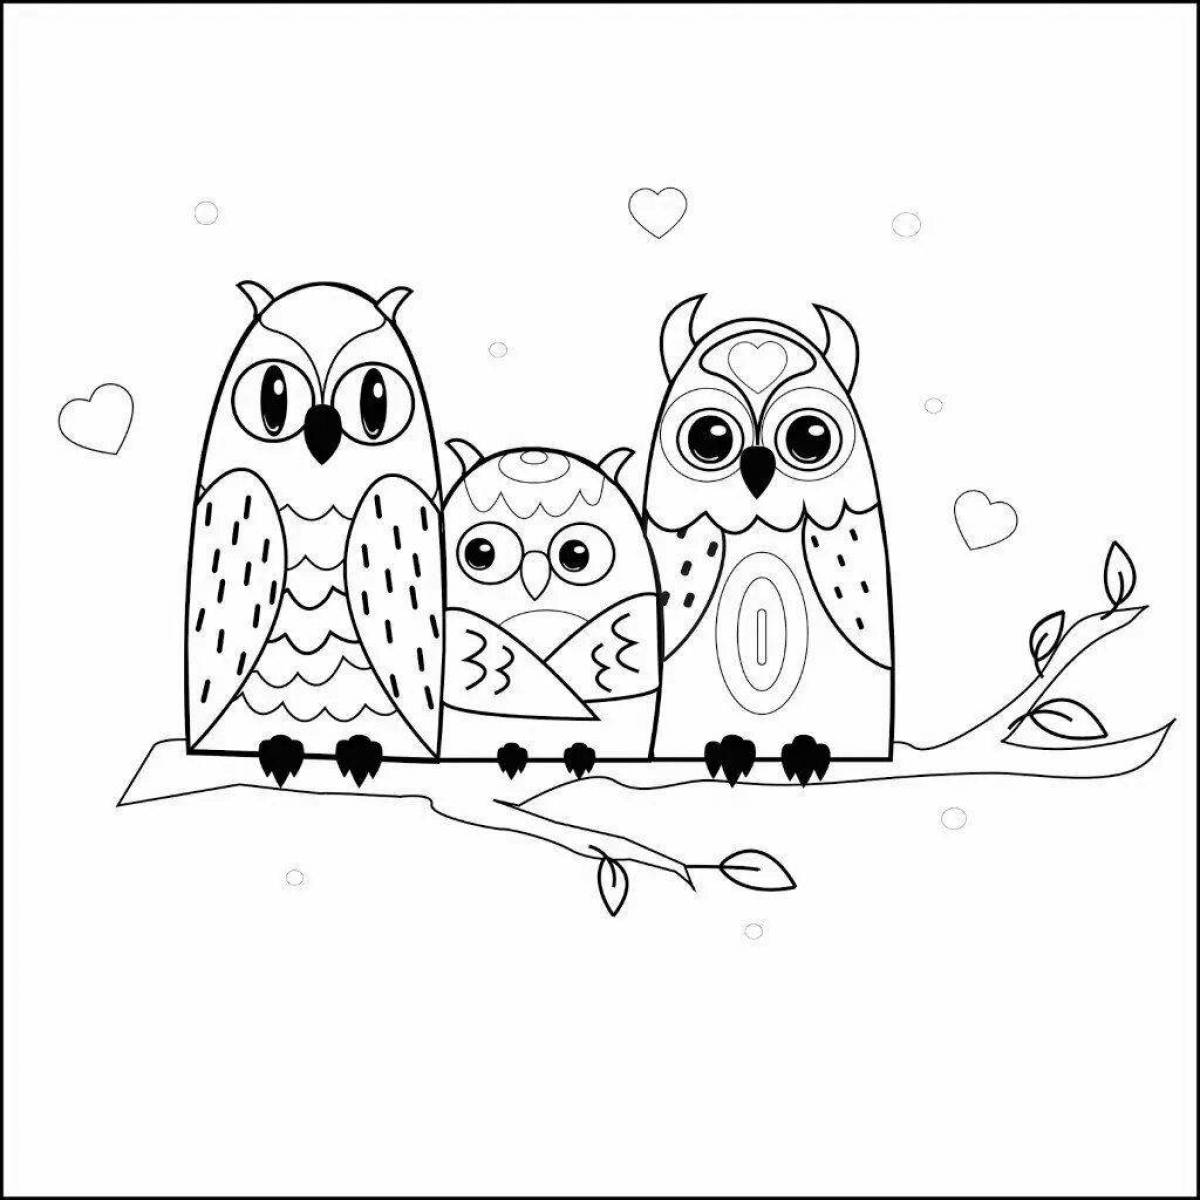 Colorful owl coloring book for kids